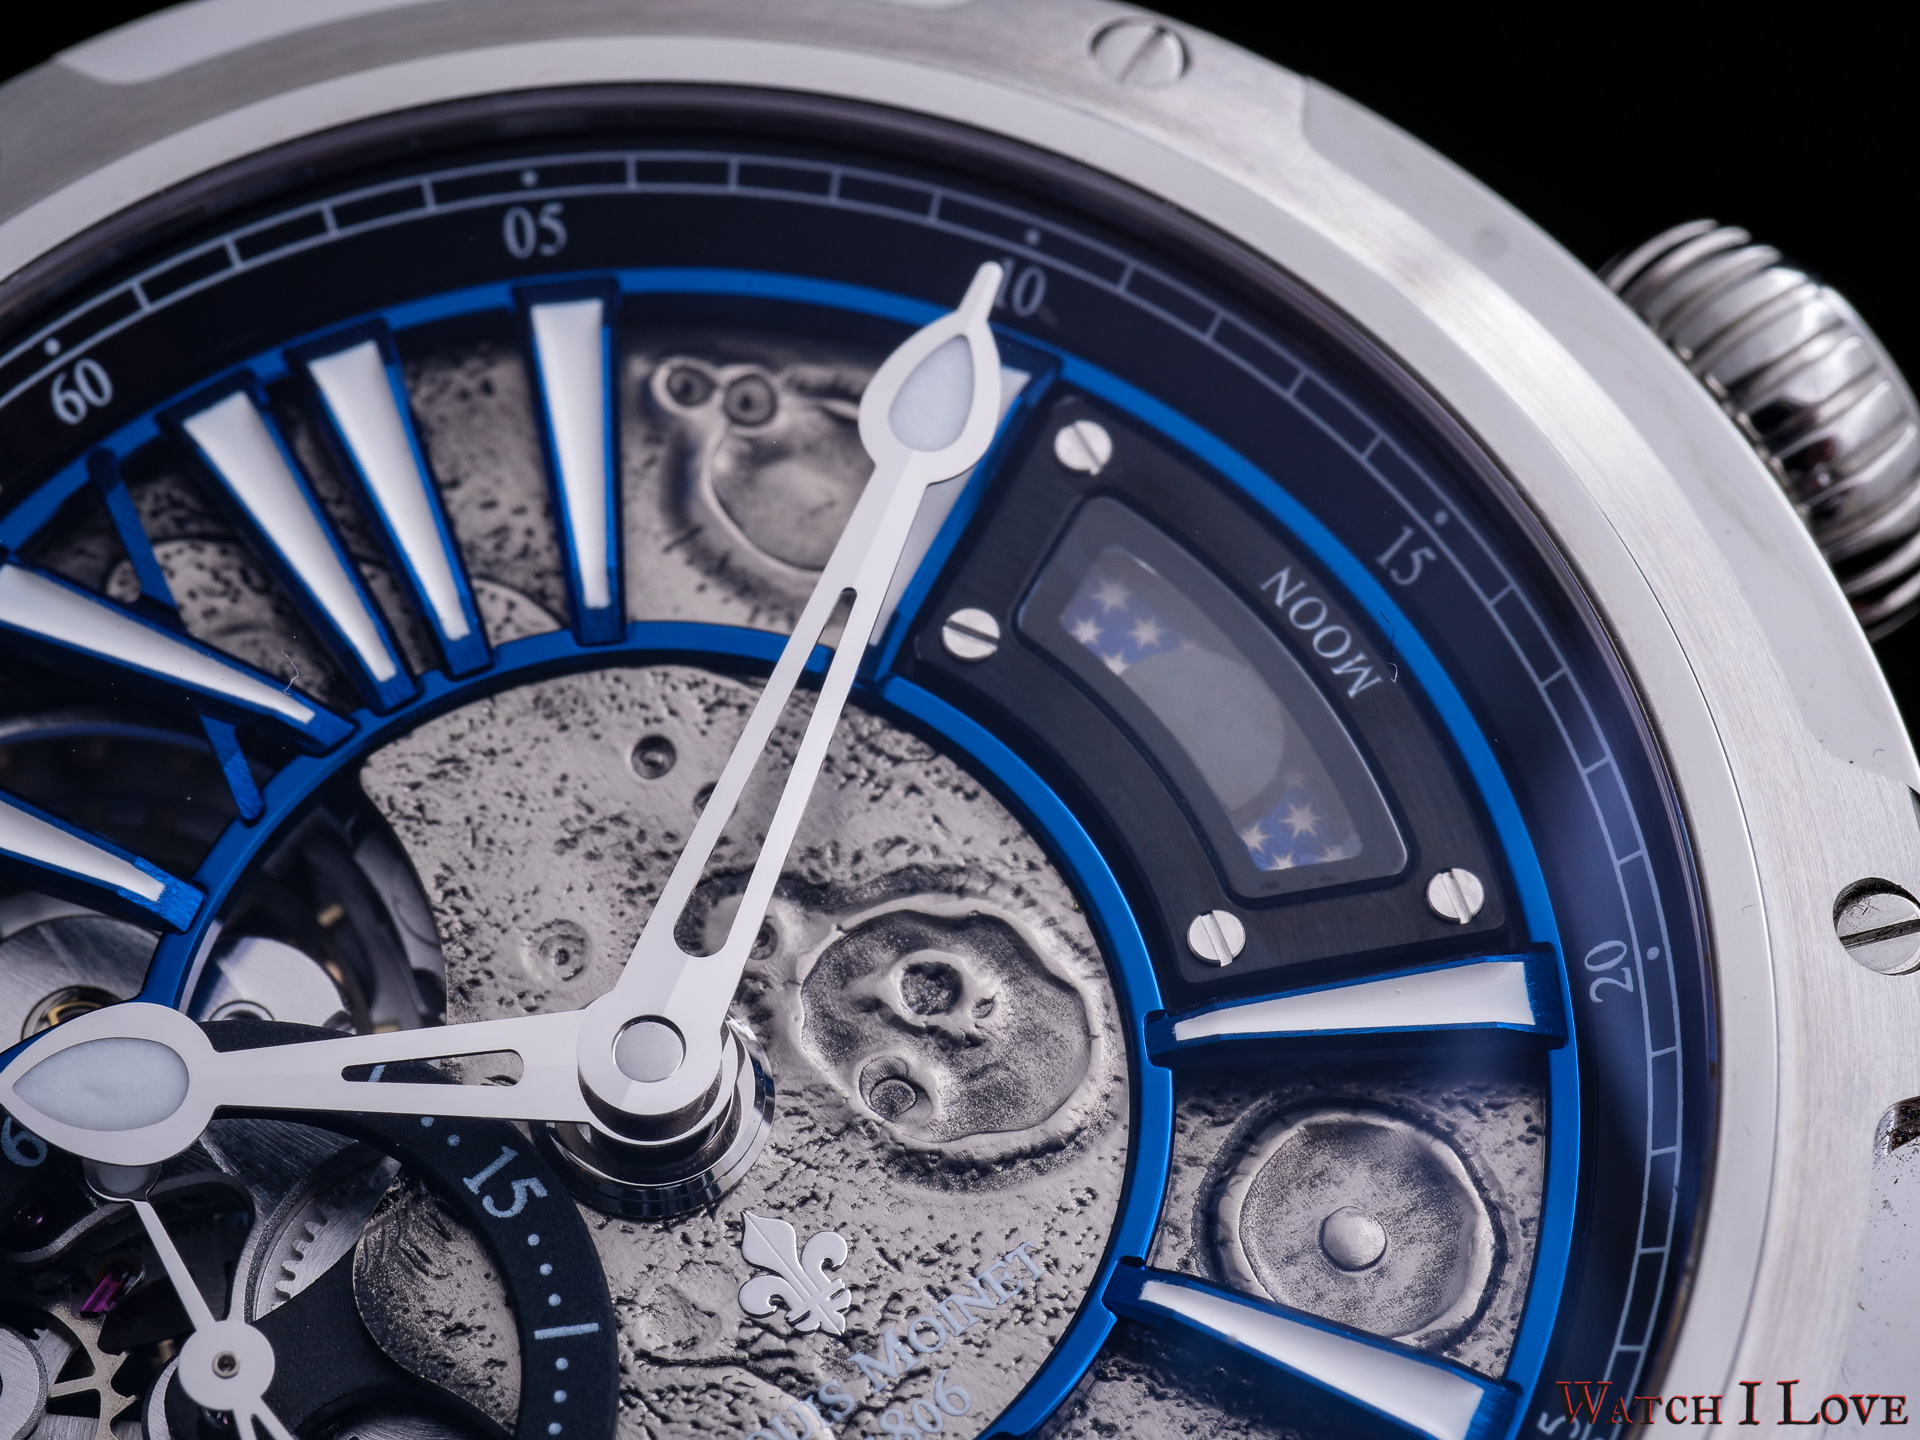 F】 The New Louis Moinet Jules Verne Tourbillon To The Moon